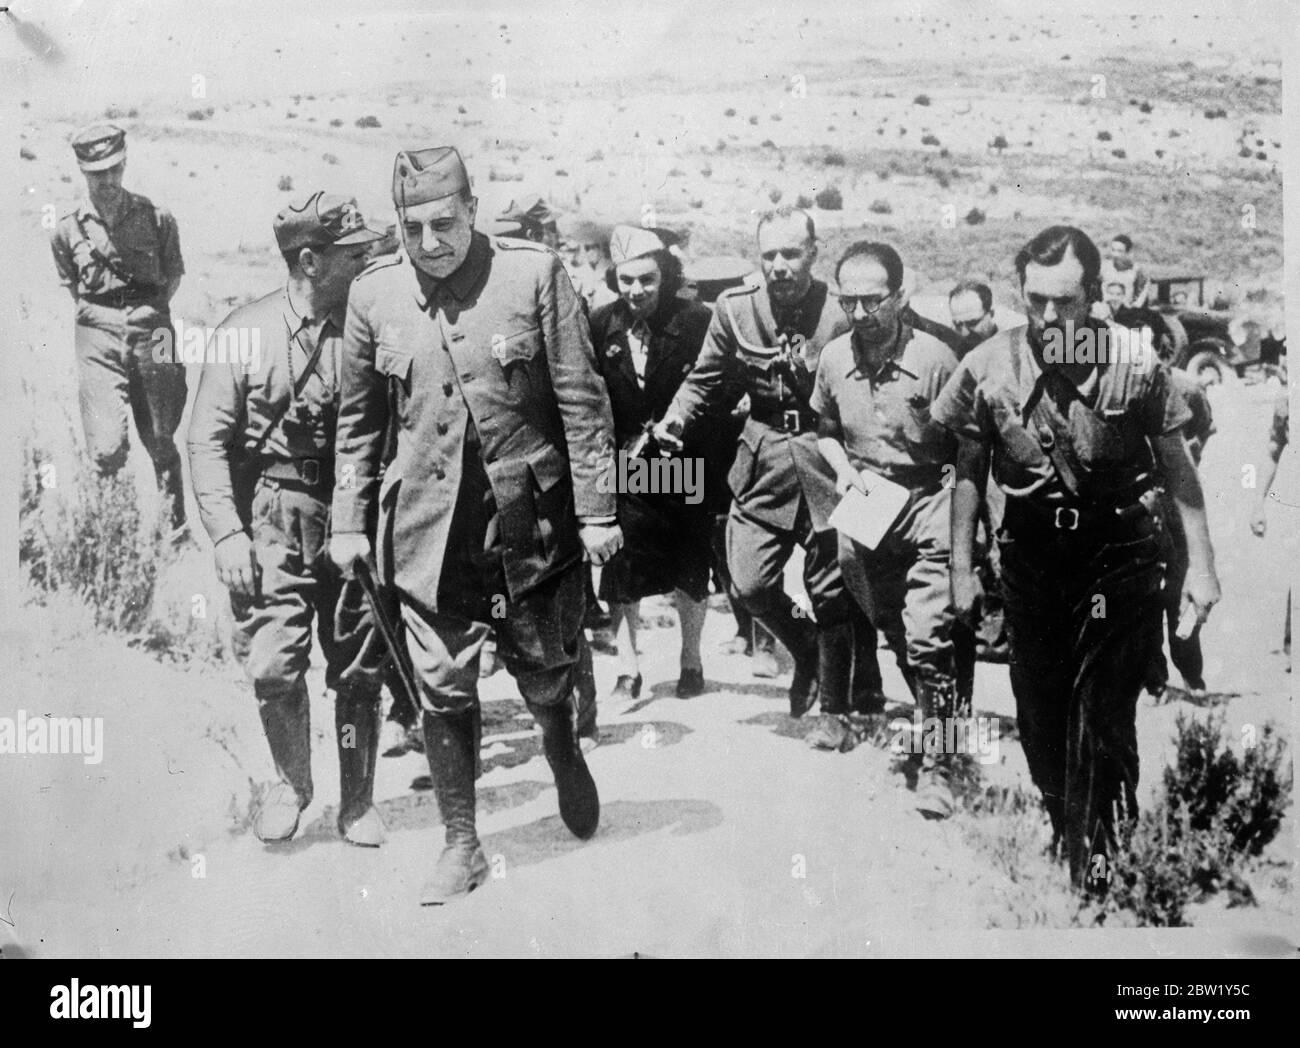 Loyalist commandos visits the Aragon front. General Pozas, the Spanish Government commander in the East, made a tour of the front line in Aragon, where the loyalist forces have been reported to be making successful attacks on the rebels. Photo shows, General Pozas (foreground) , touring the Aragon front with members of his staff. A woman can be seen in the party. 11 June 1937 Stock Photo